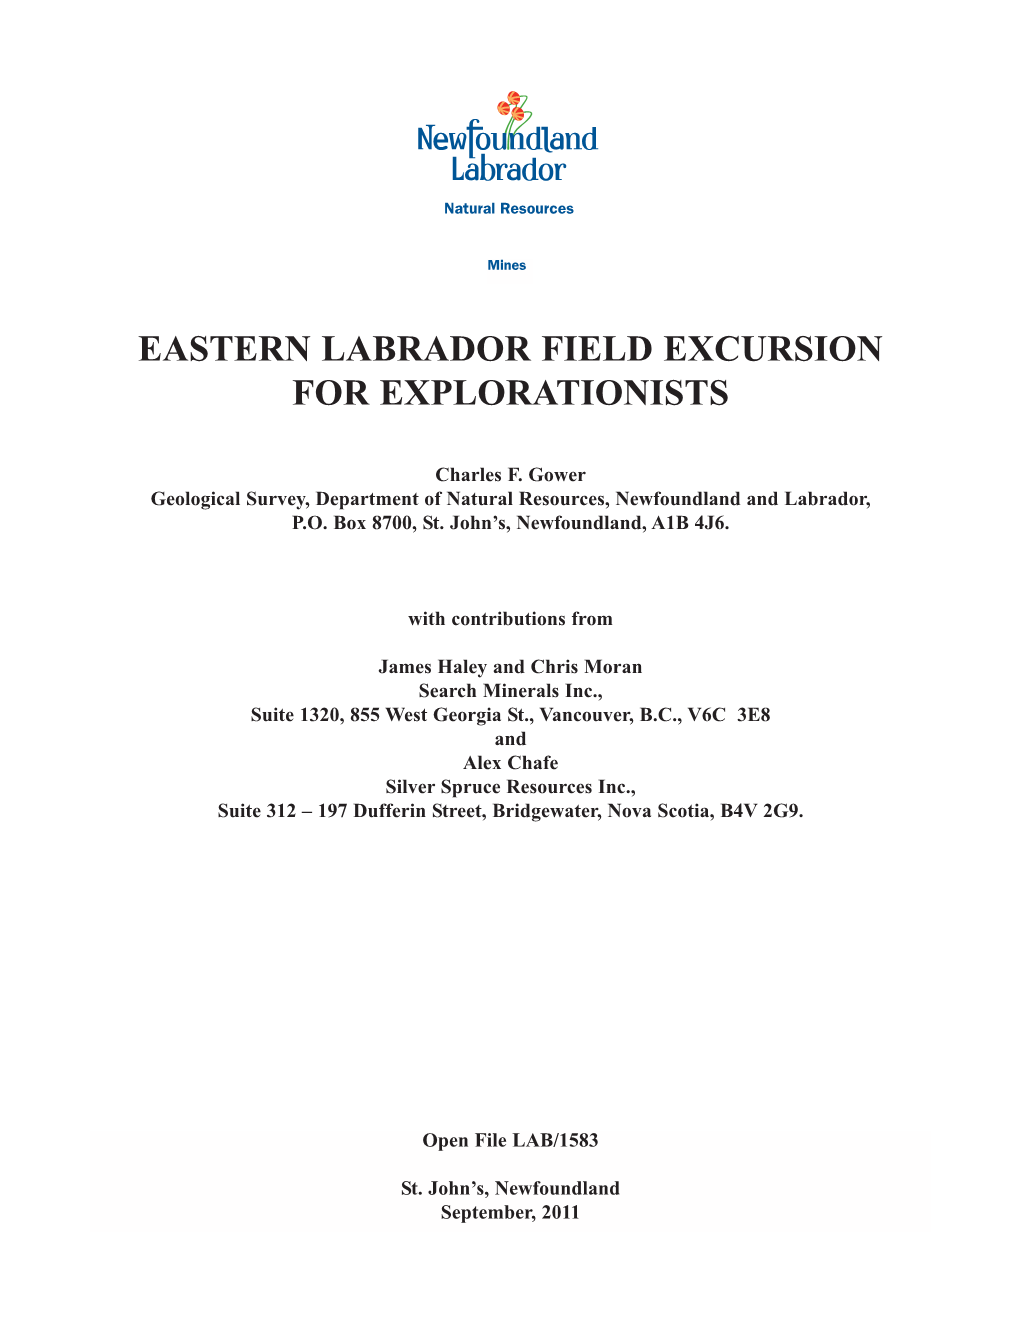 Eastern Labrador Field Excursion for Explorationists